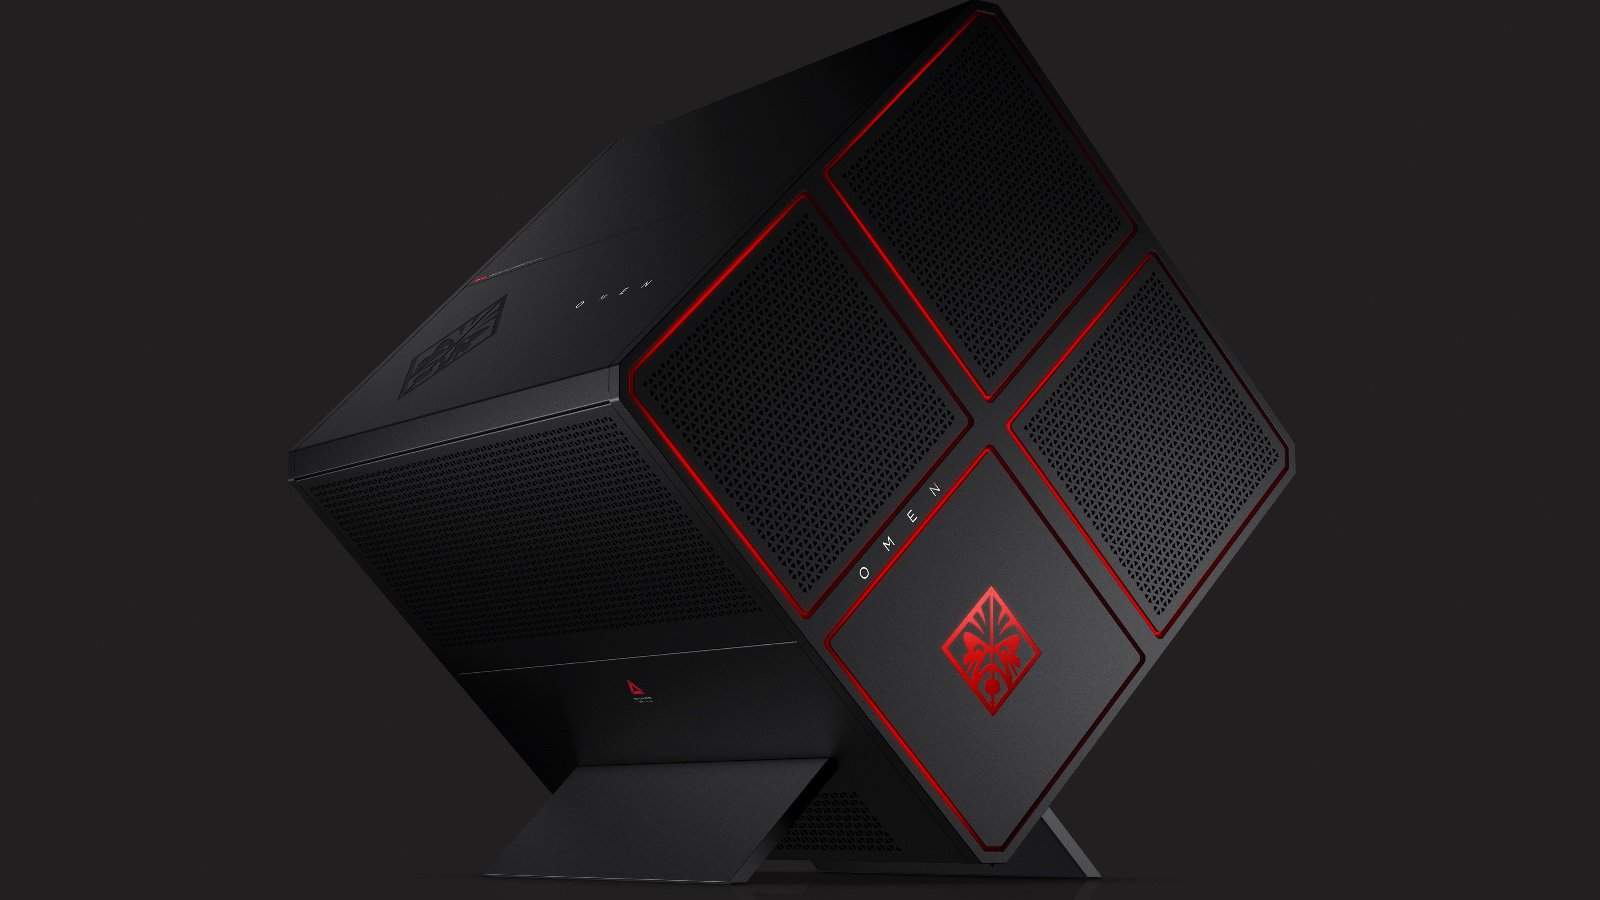 Say Hello To The HP Omen X, A High End And Customisable VR Ready PC